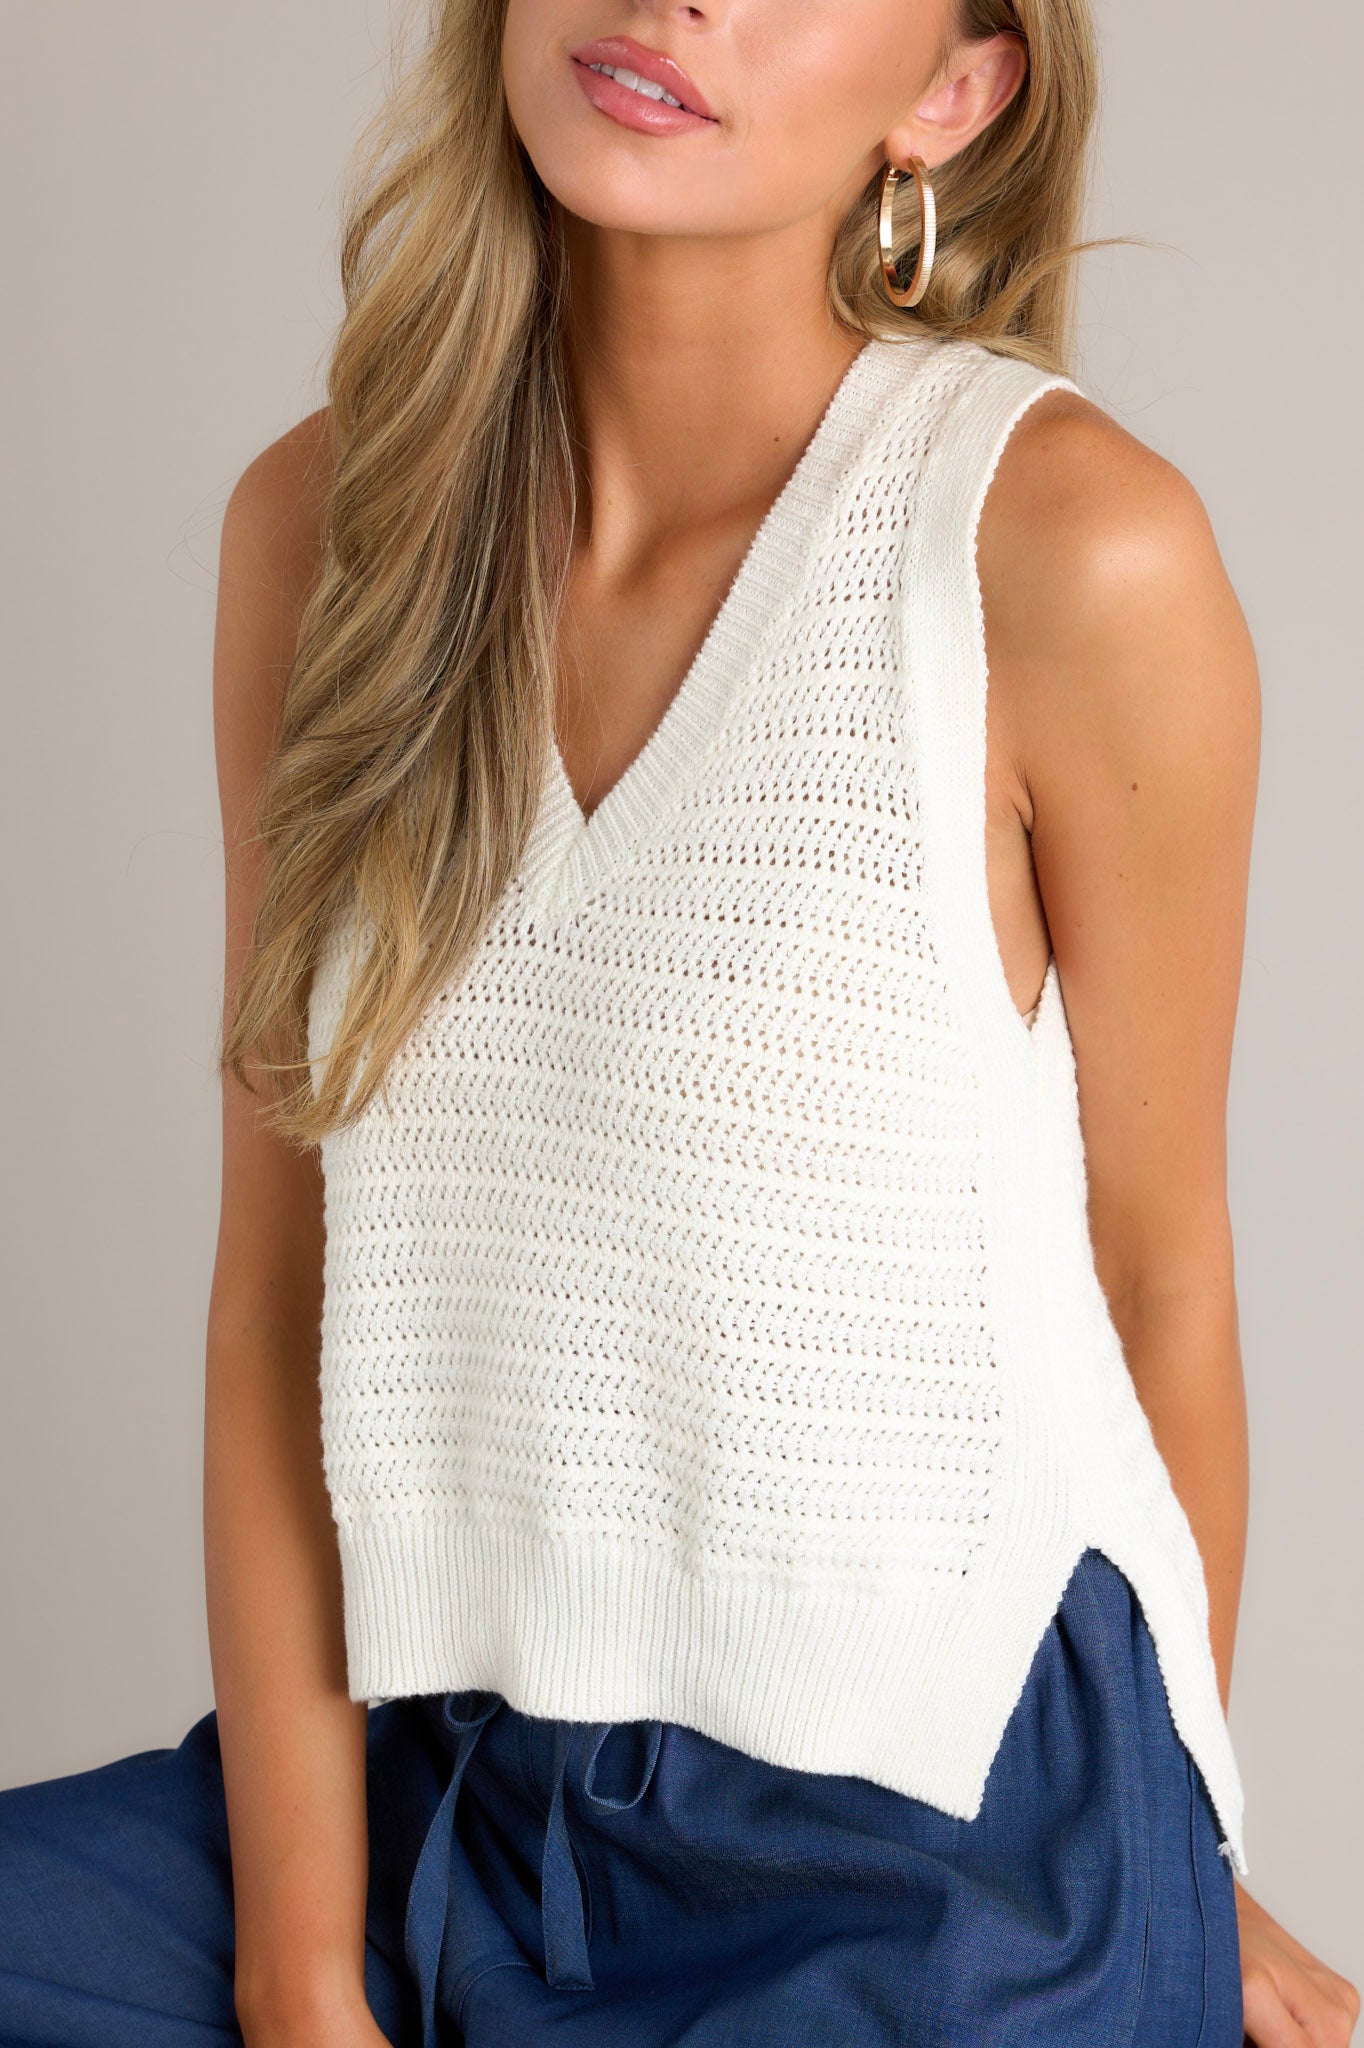 Close-up of the ivory top showing the v-neckline and the knit texture.